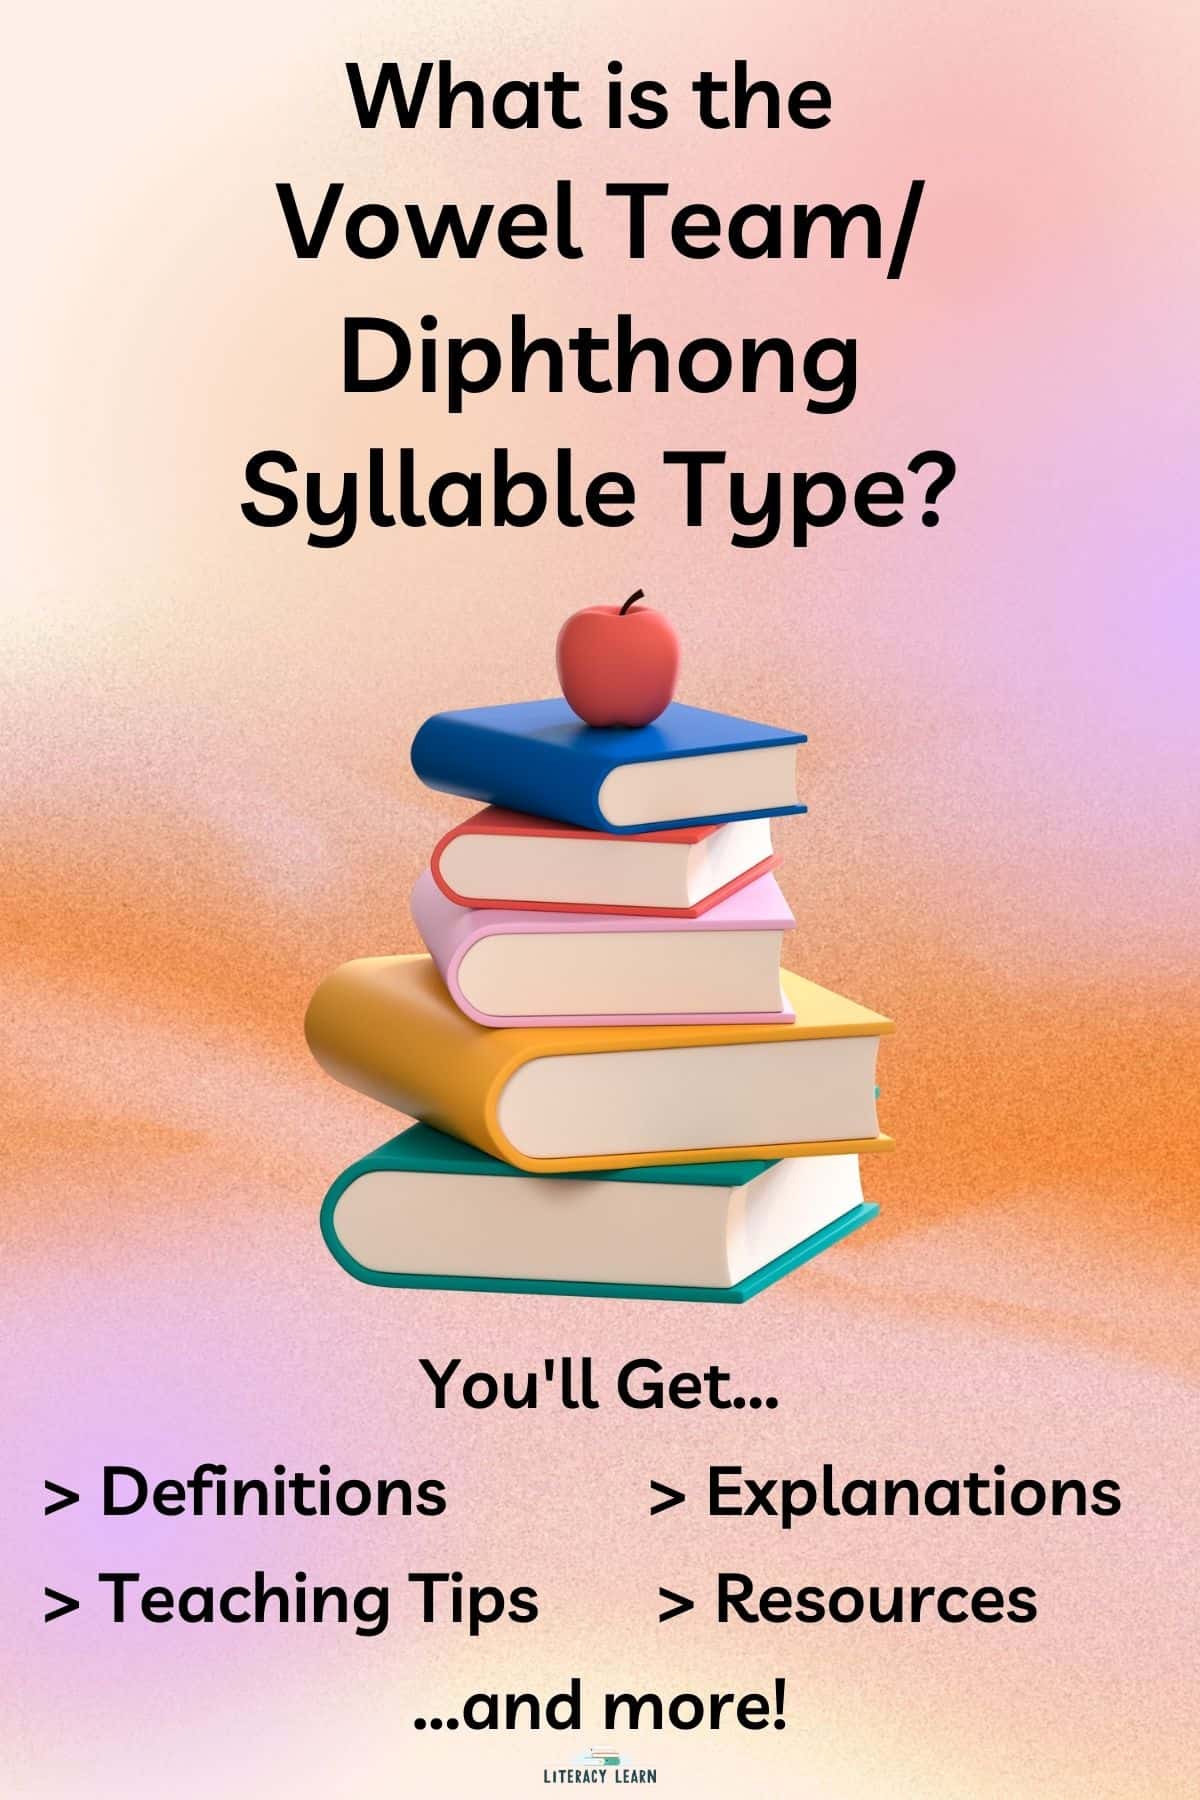 Colorful background with a pile of books and title "What is the Vowel Team/Diphthong Syllable Type?"